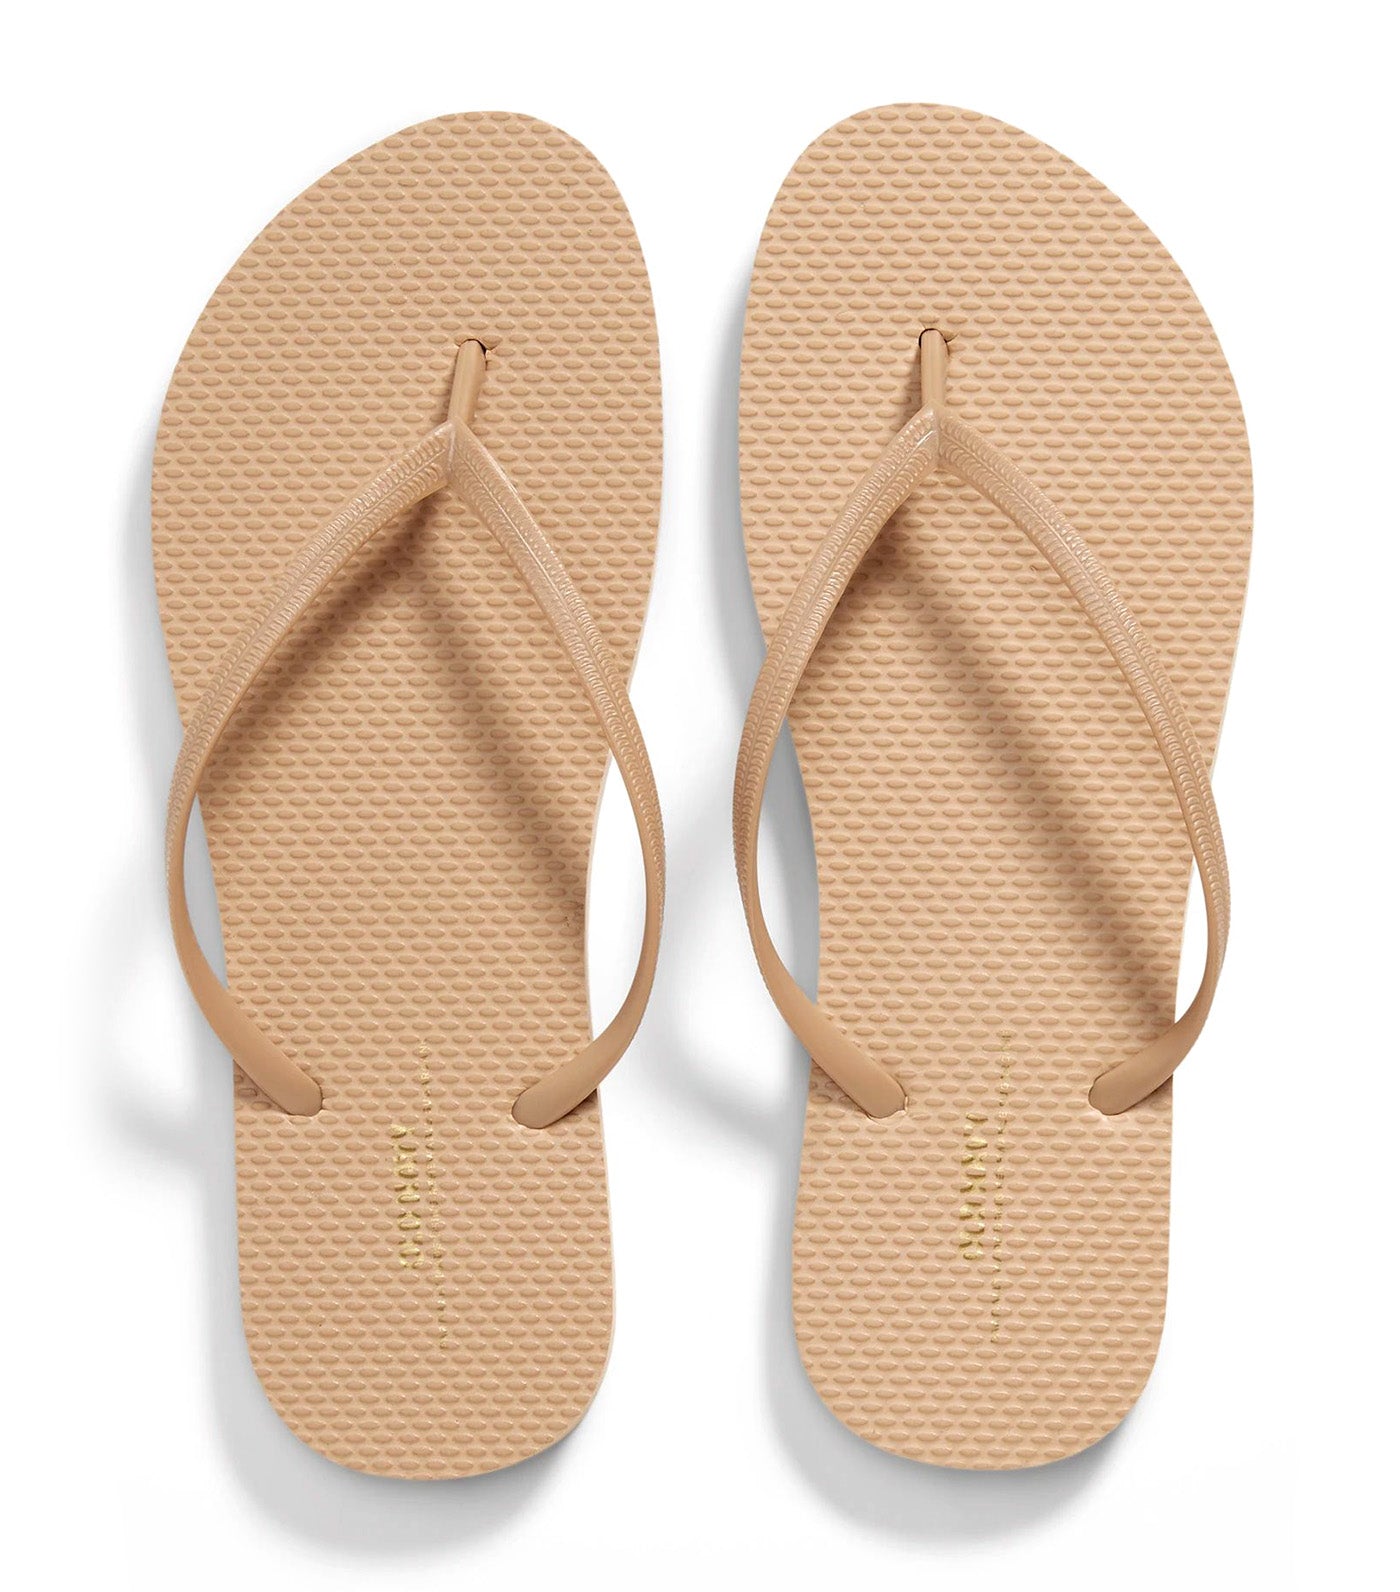 Flip-Flop Sandals for Women (Partially Plant-Based) Candy Graham